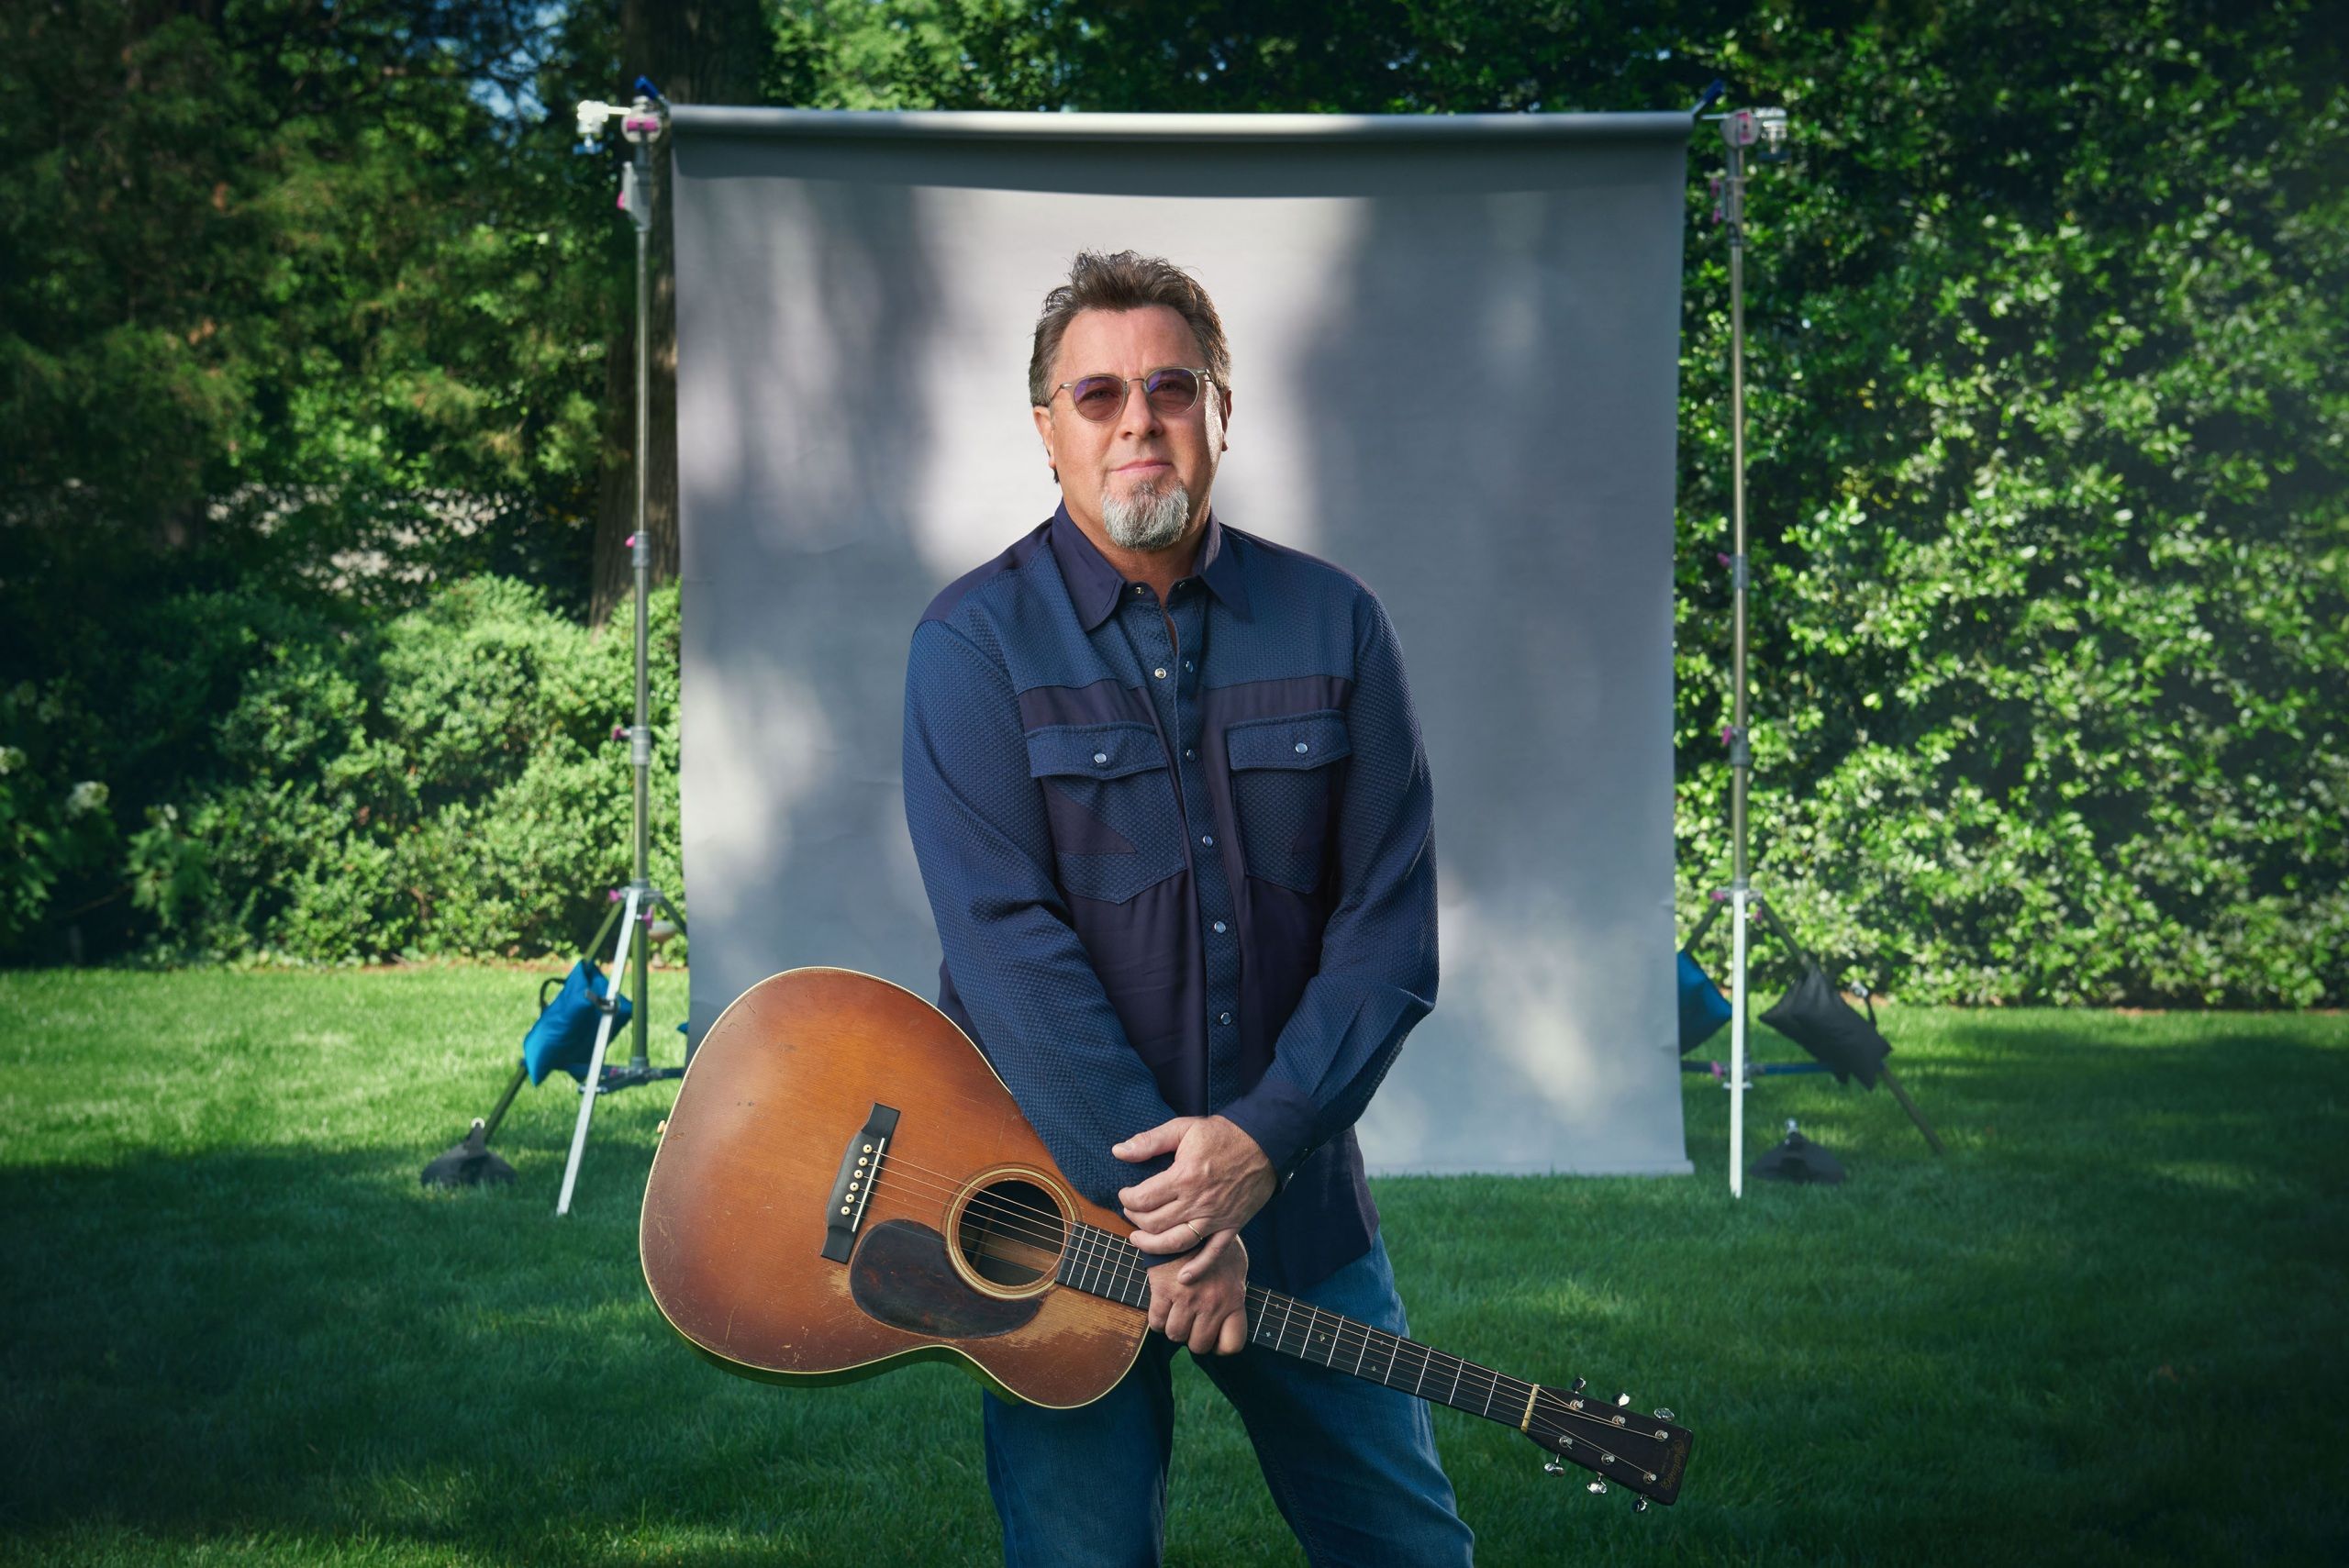 Vince Gill Announces Summer Tour – Wendy Moten Joining as Featured Guest